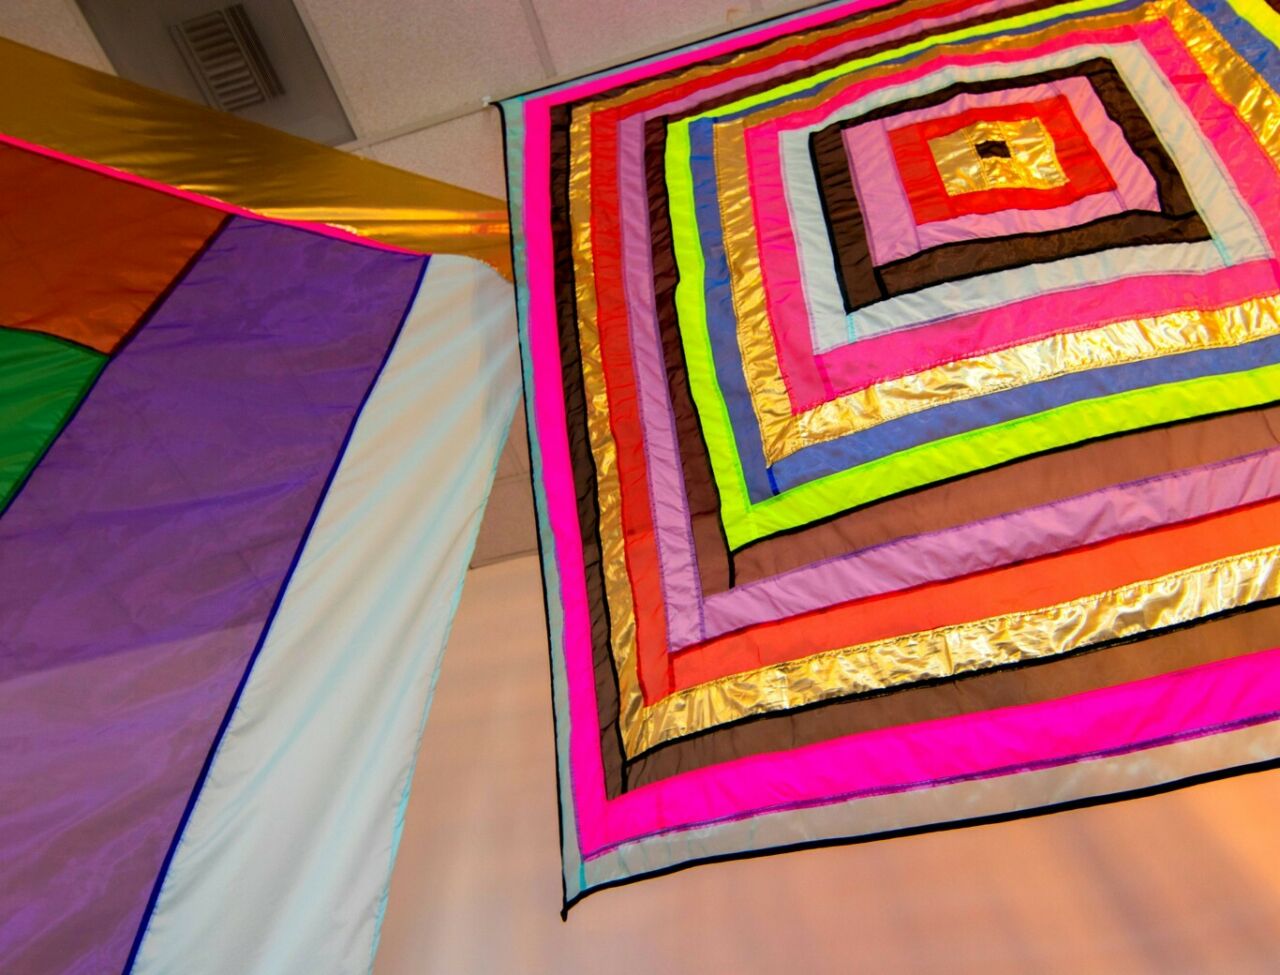 SYZYGY, an installation of colorful fabric structures by nationally recognized artist RACHEL HAYES